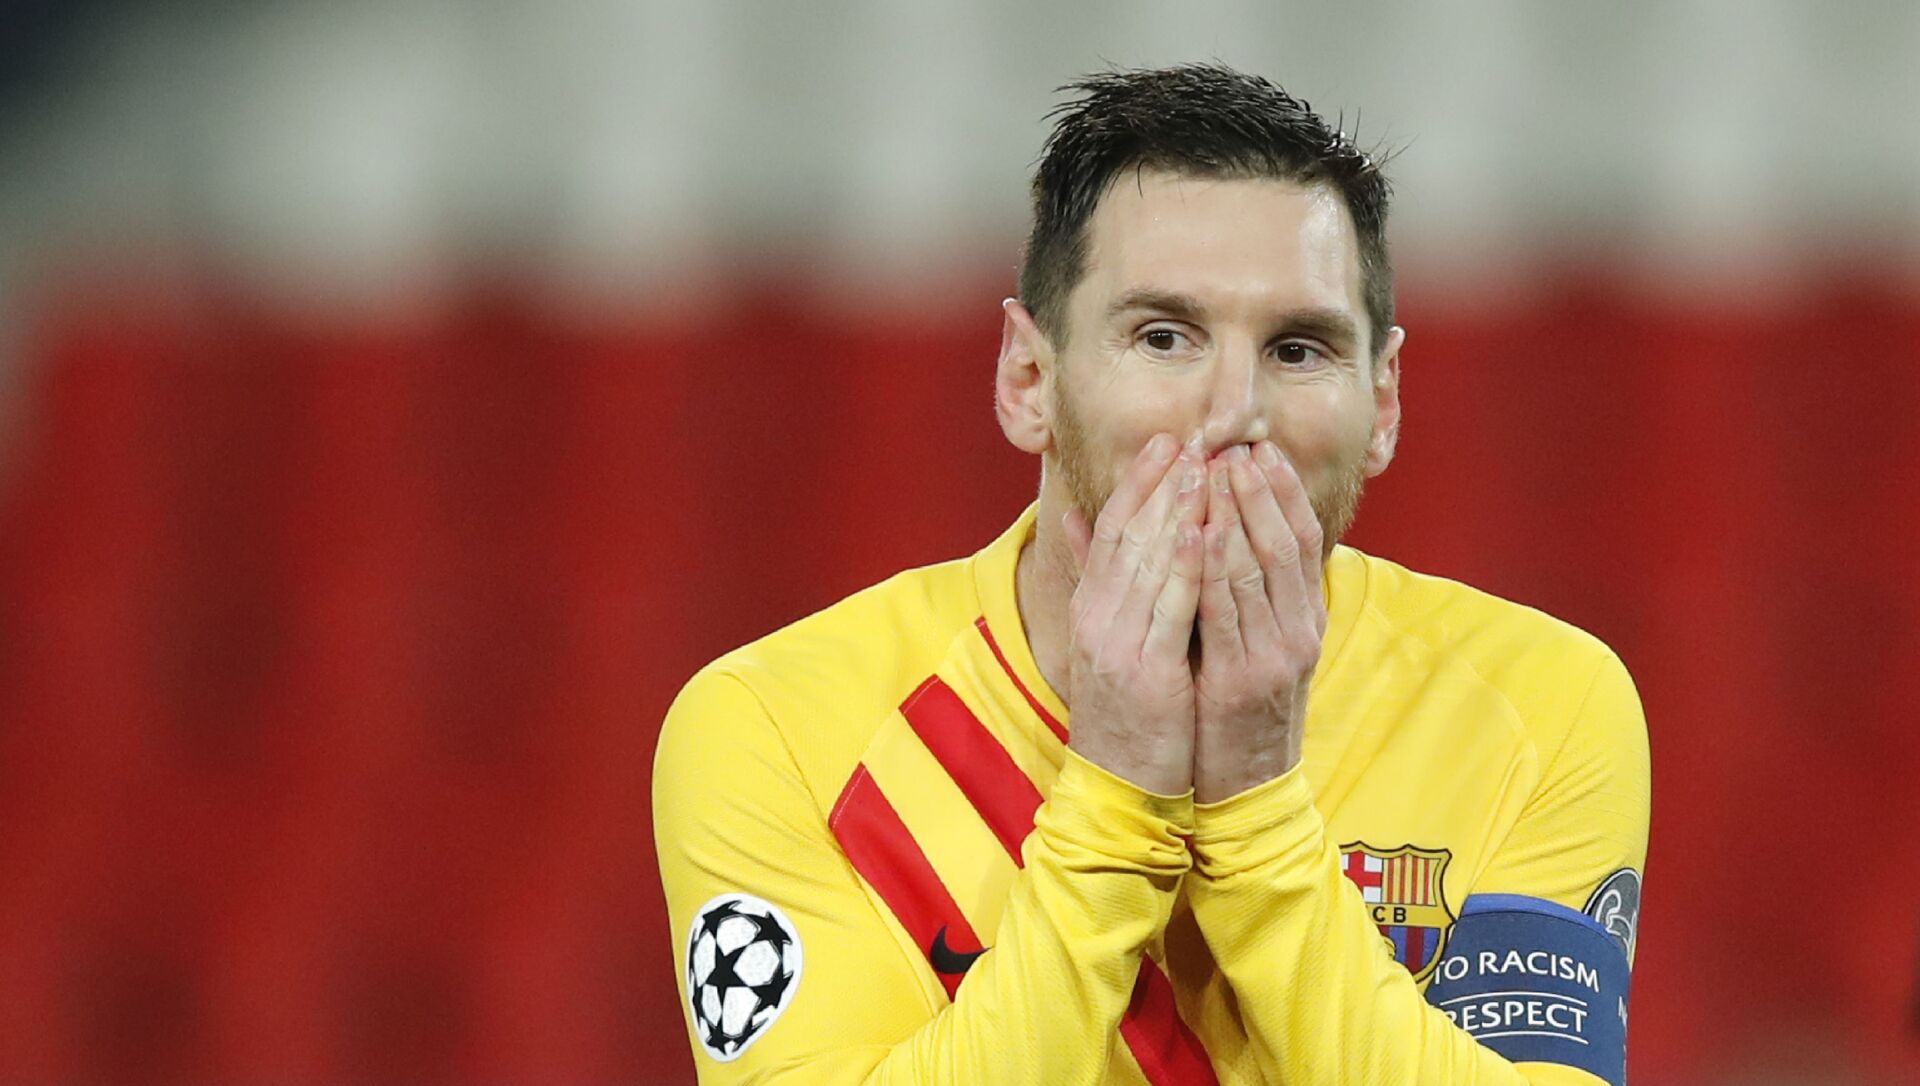 Barcelona's Lionel Messi reacts after a missed a penalty shot during the Champions League, round of 16, second leg soccer match between Paris Saint-Germain and FC Barcelona at the Parc des Princes stadium in Paris on Wednesday, March 10, 2021 - اسپوتنیک افغانستان  , 1920, 19.04.2021